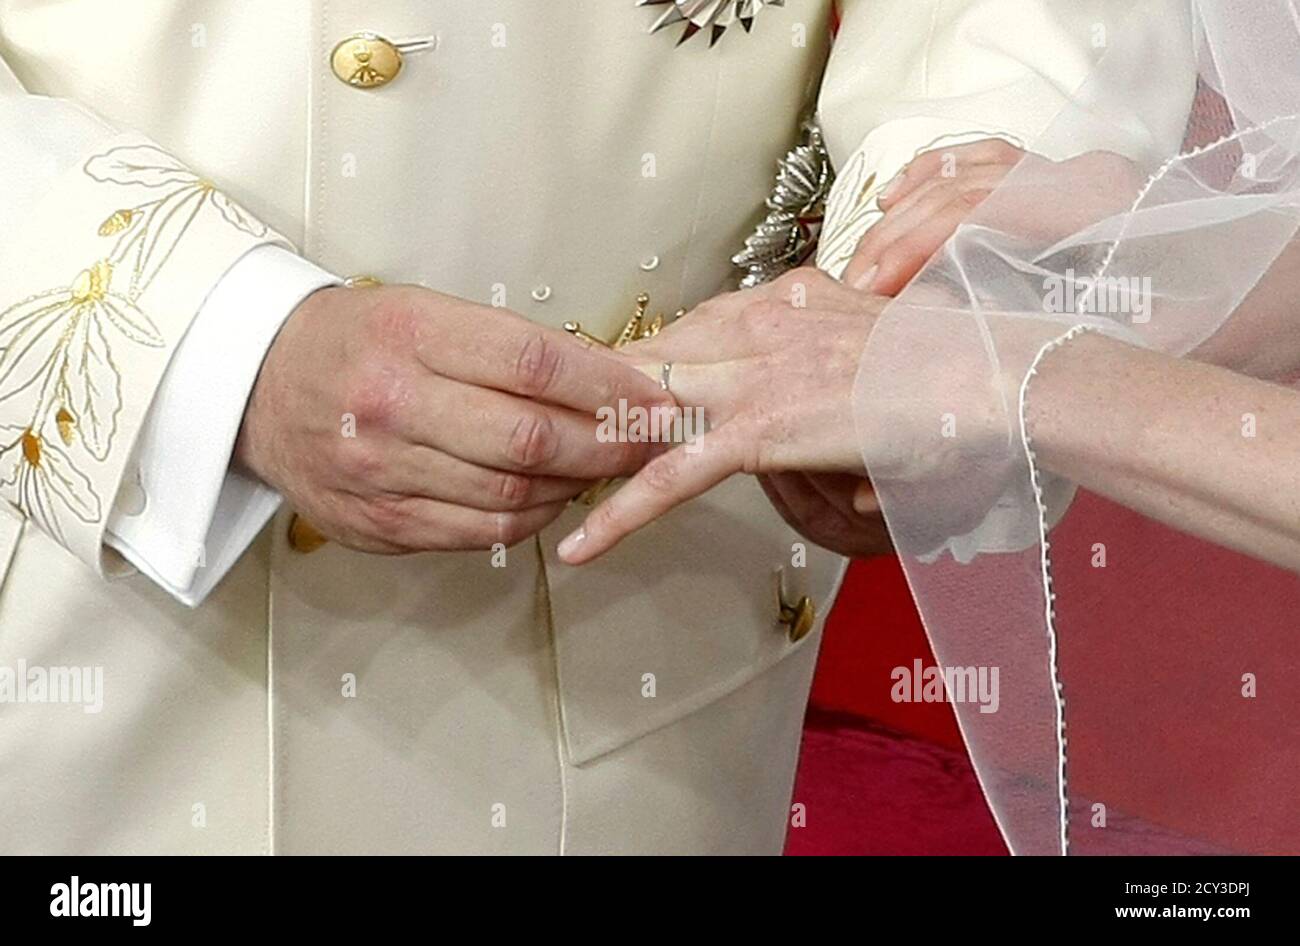 Prince Albert II of Monaco puts the wedding ring on the finger of his bride Princess  Charlene during their religious wedding ceremony at the Palace in Monaco  July 2, 2011. REUTERS/Lionel Cironneau/Pool (